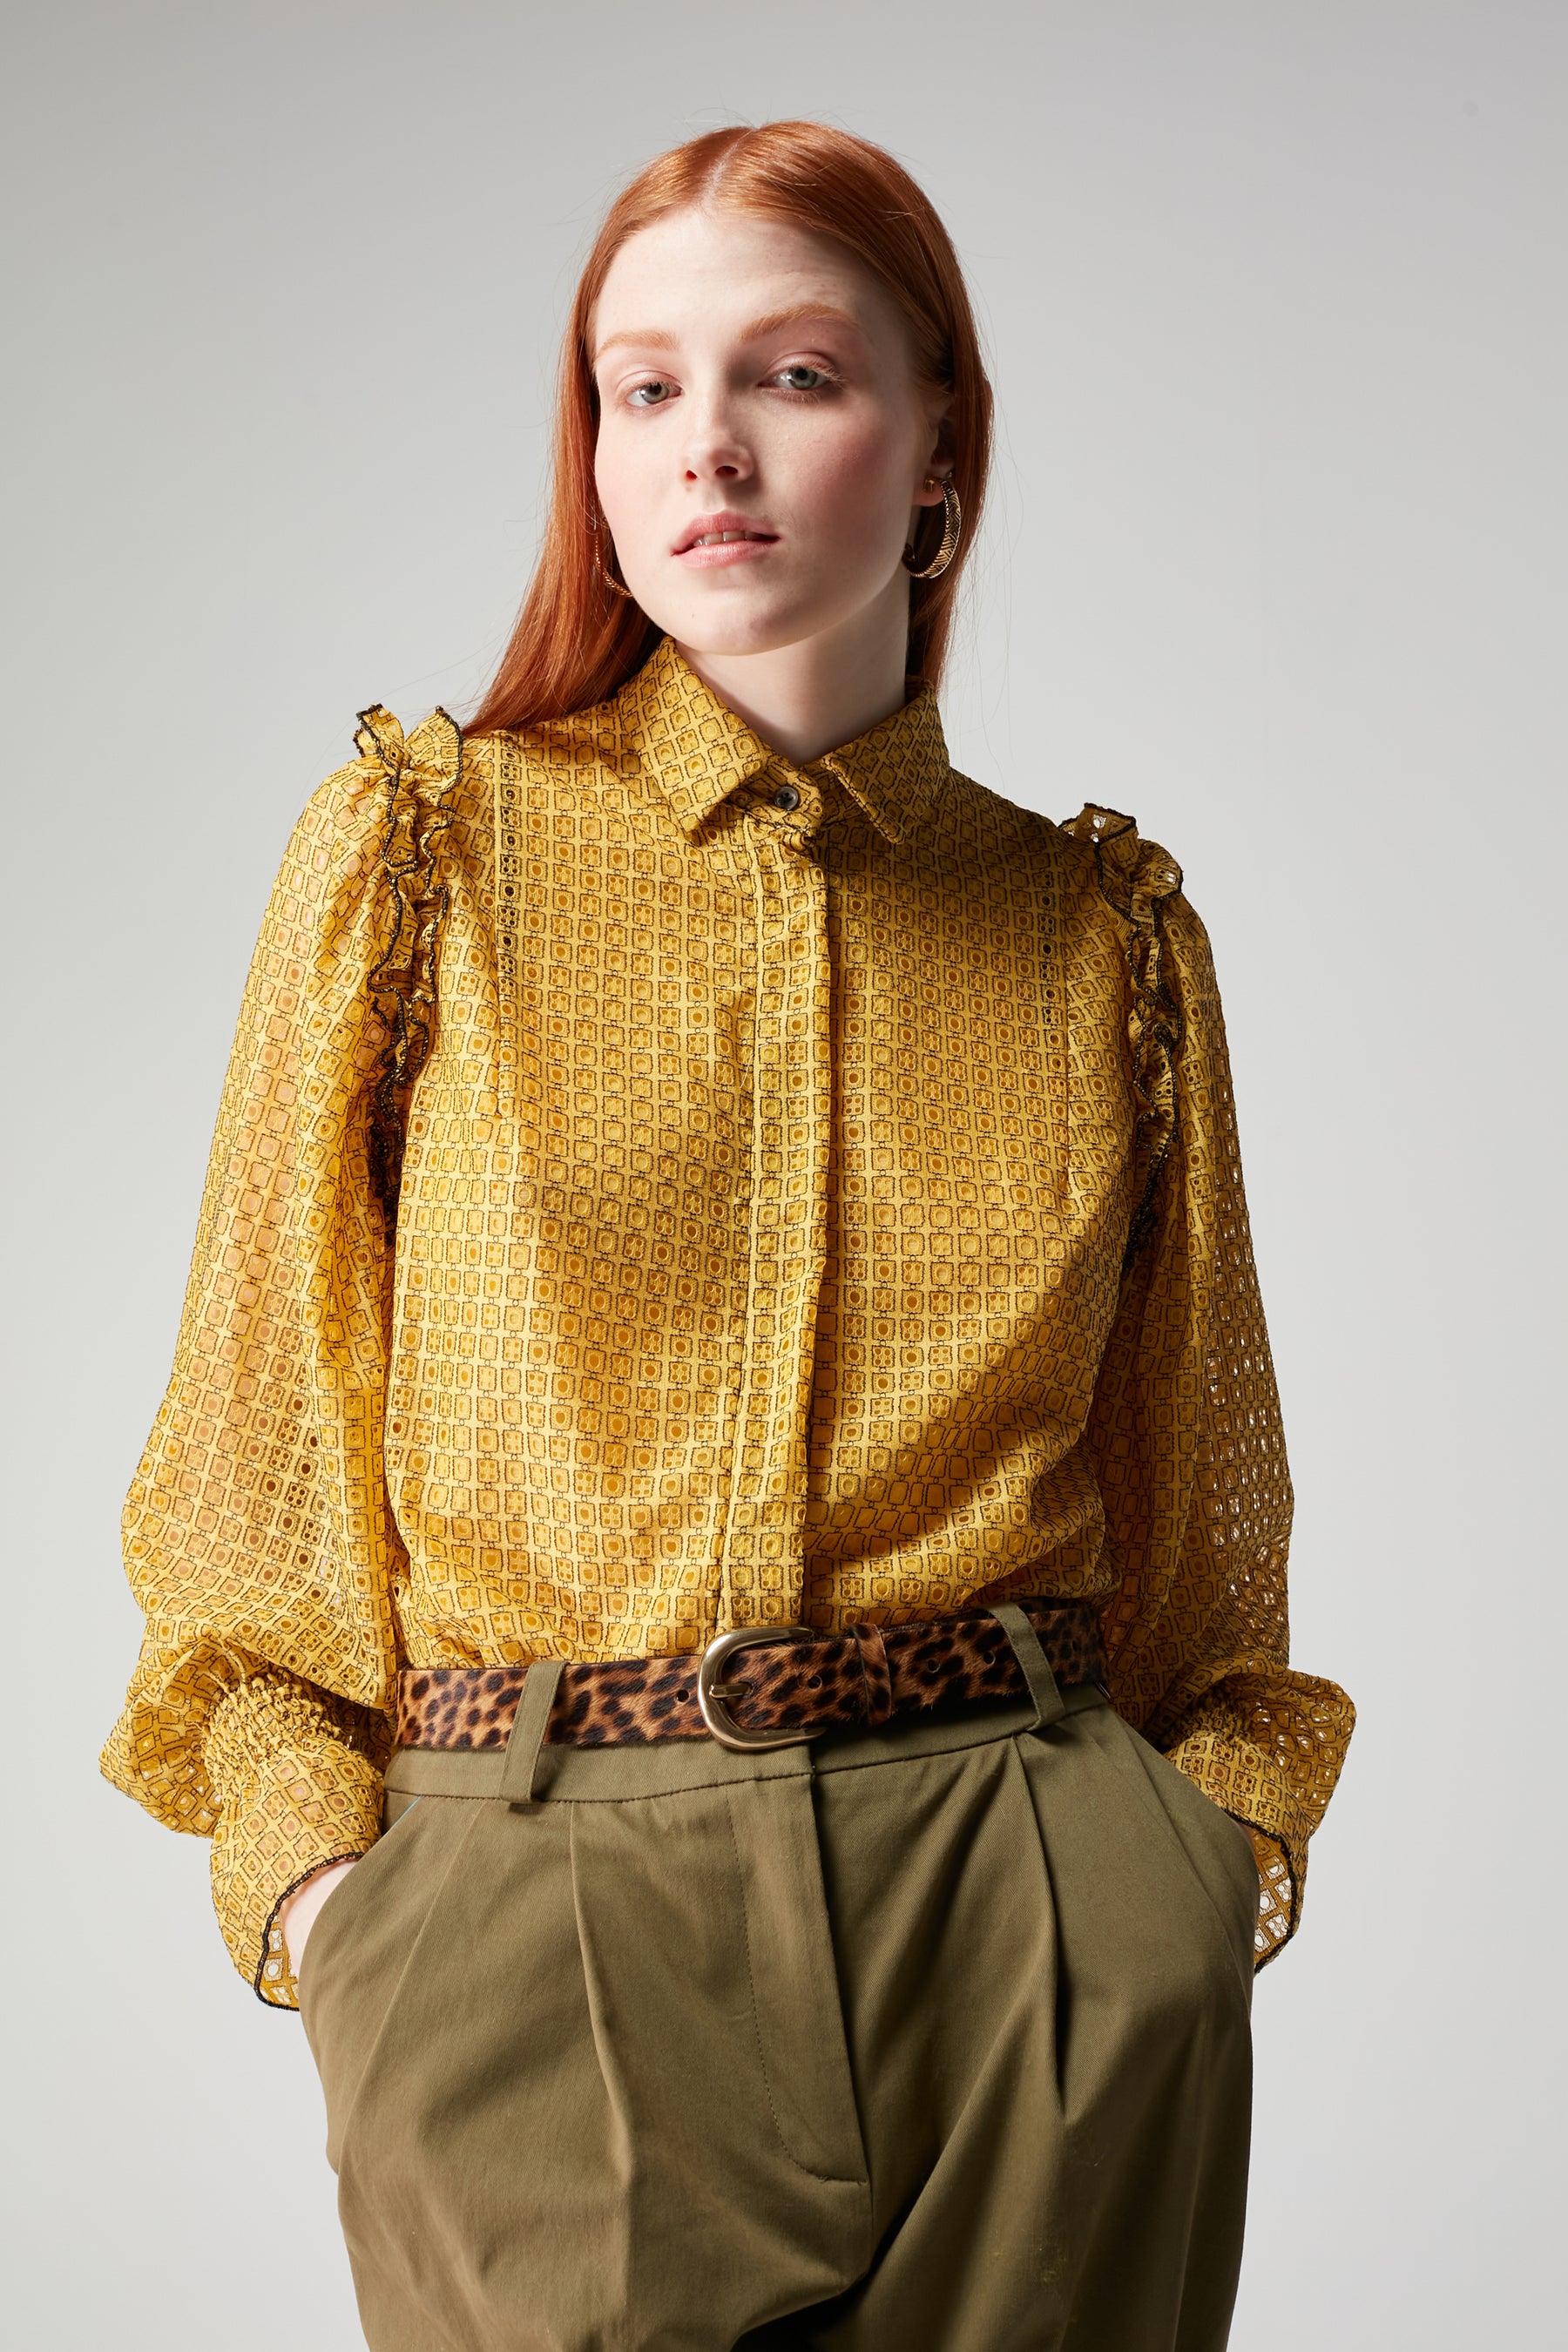 Imogen shirt in Honeycombs lace